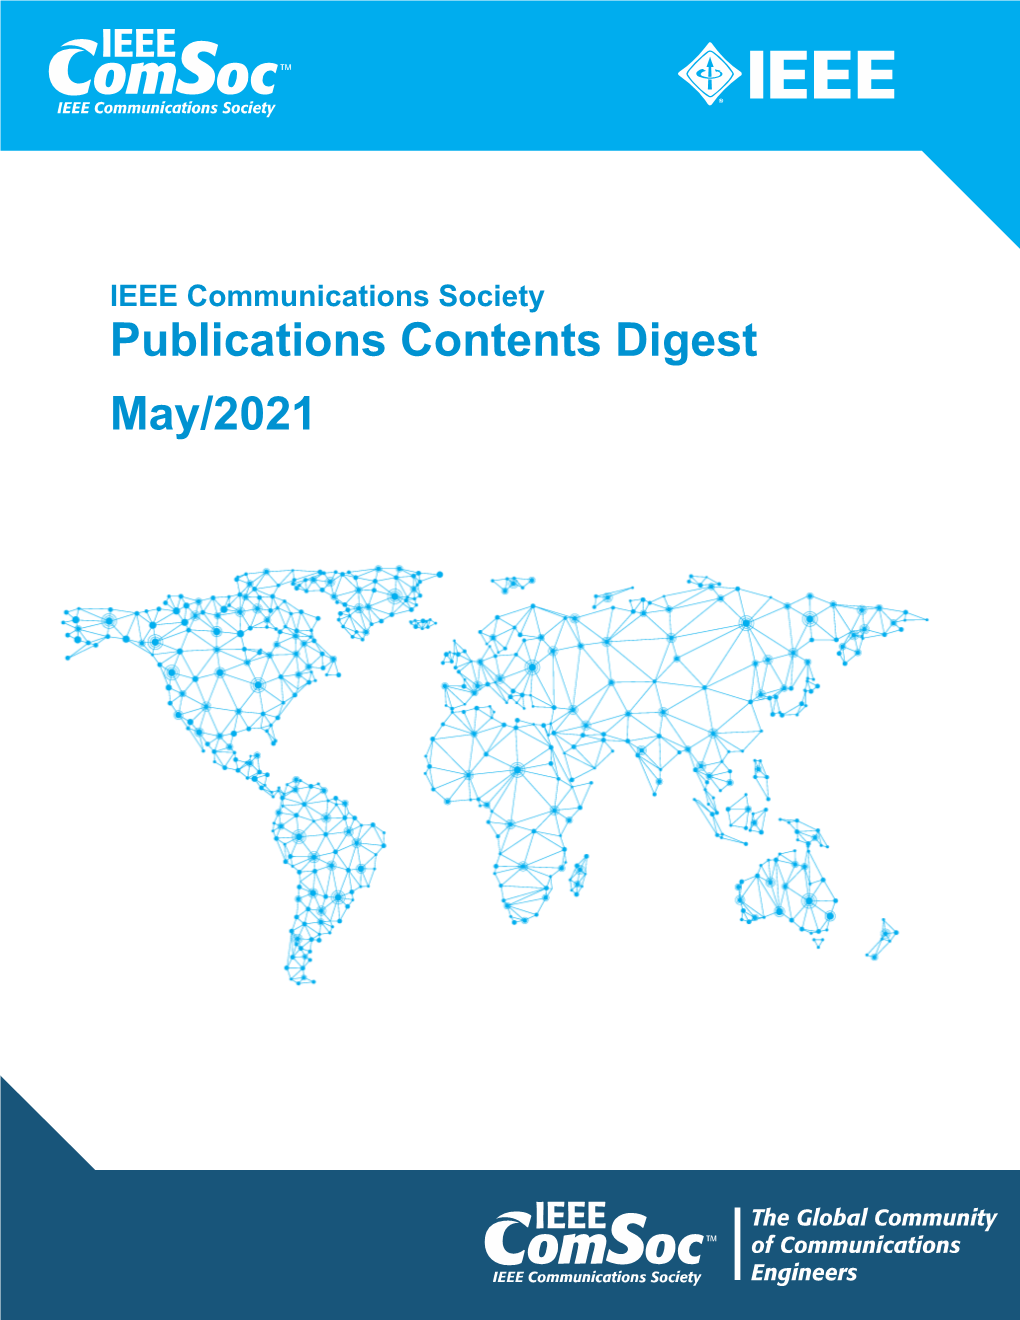 Publications Contents Digest May/2021